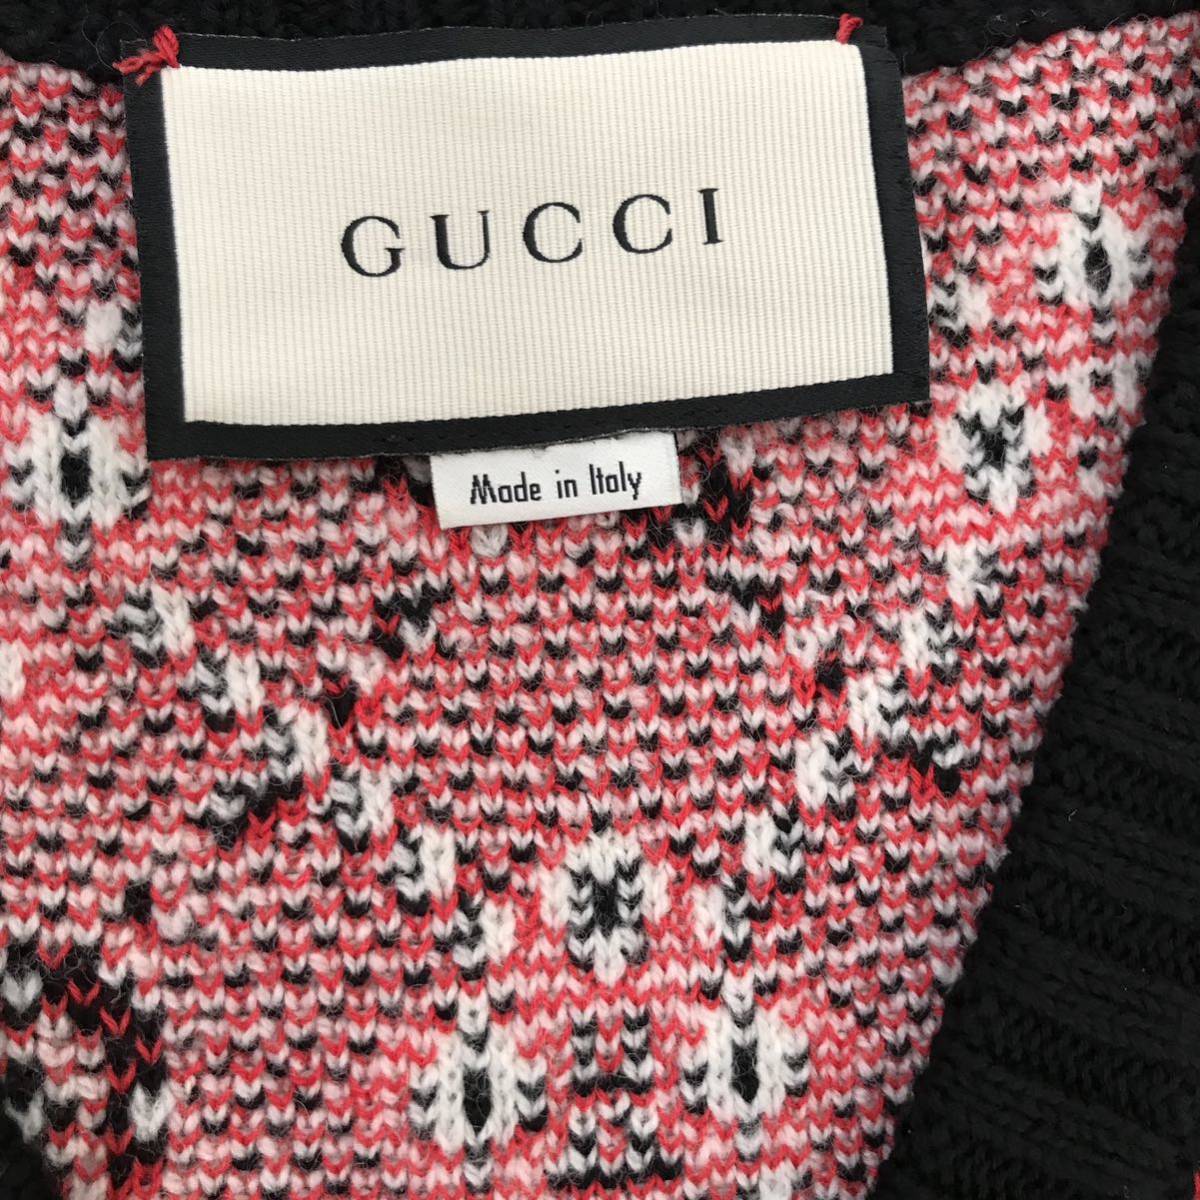  beautiful goods GUCCI Gucci GG Logo V neck knitted sweater men's L size 